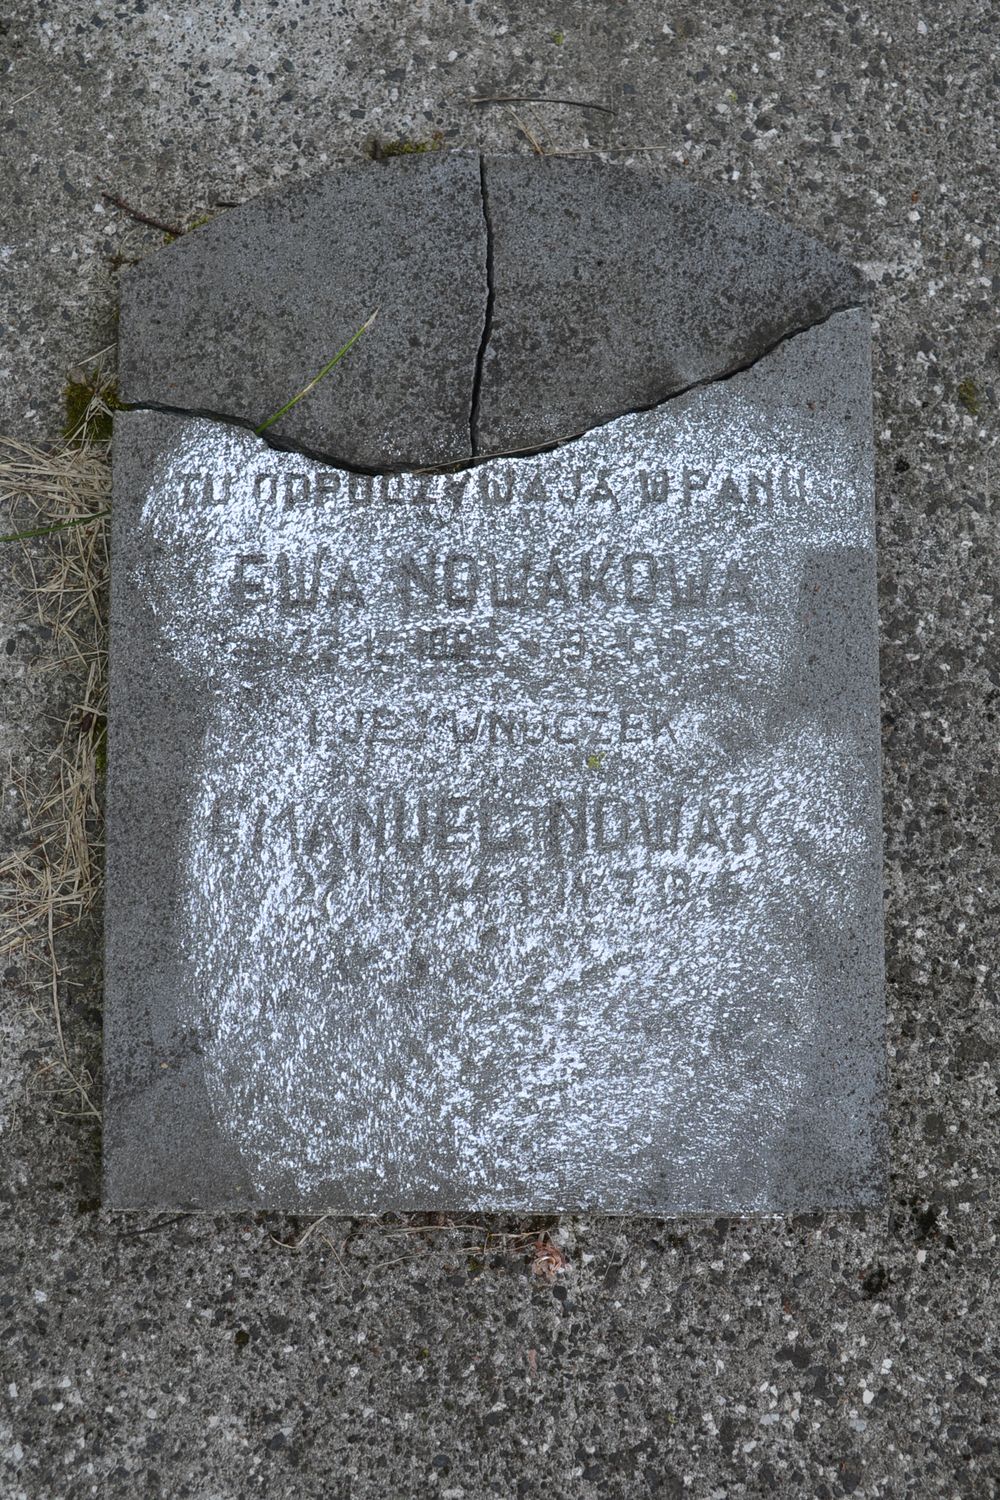 Inscription plaque of the tomb of Ewa and Emanuel Nowak, cemetery in Karviná Mexico, Czech Republic, as of 2022